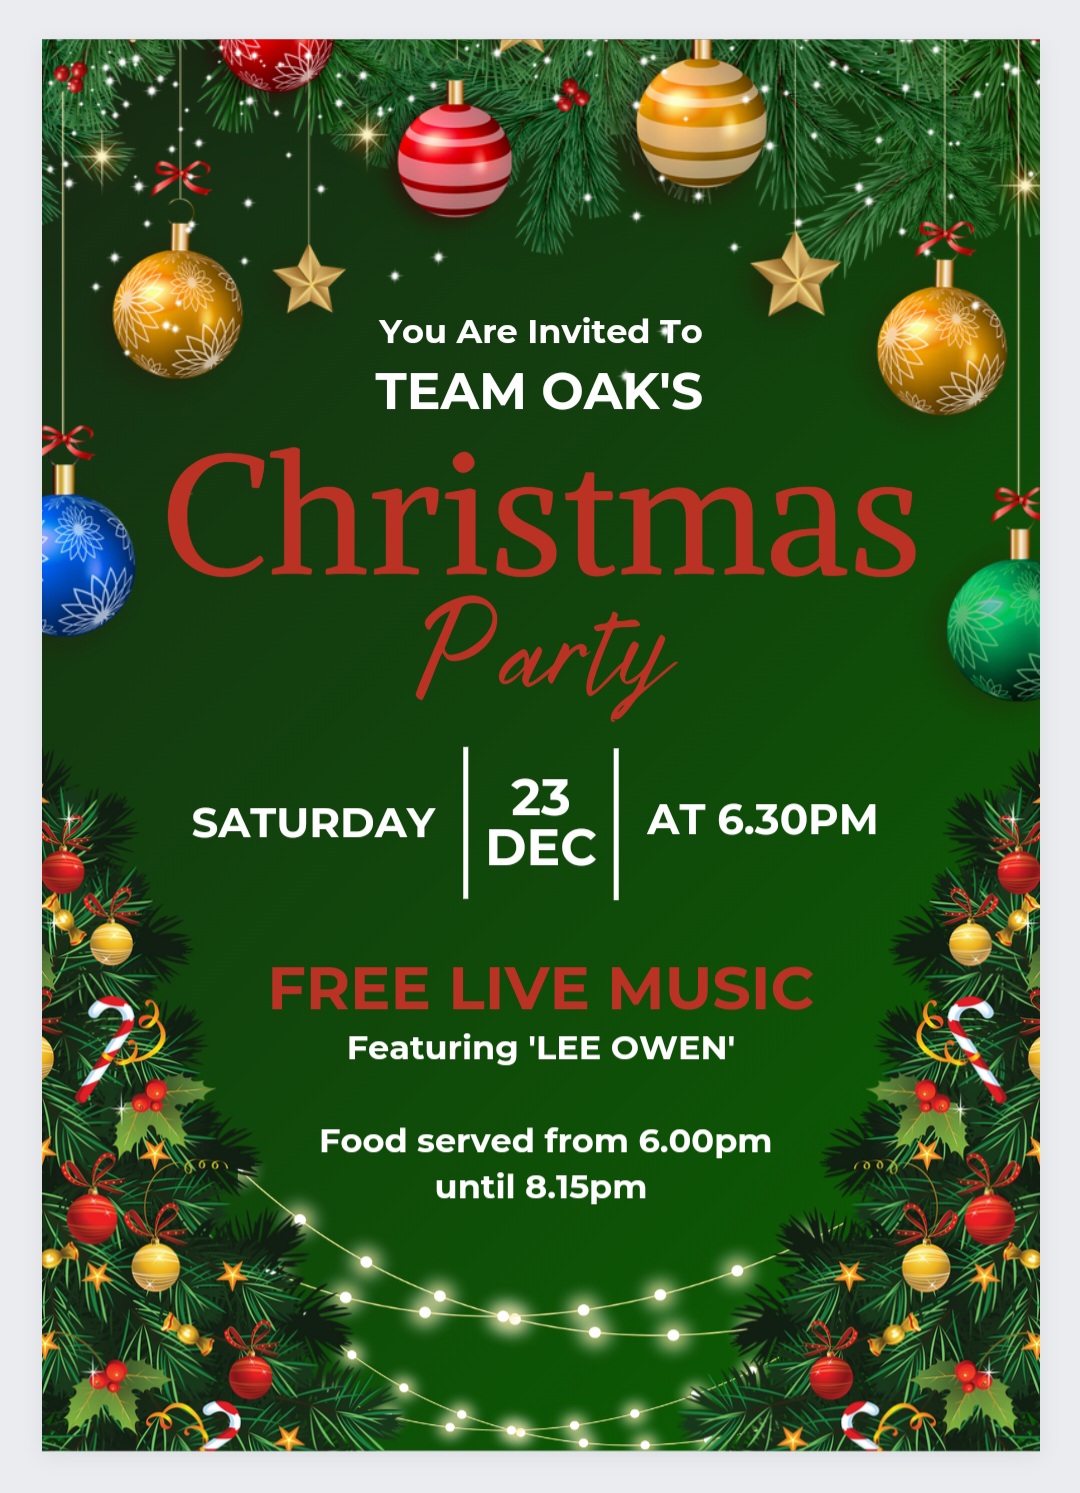 FREE LIVE MUSIC EVENT on SATURDAY 23rd December at 6.30pm featuring 'LEE OWEN' performing LIVE MUSIC